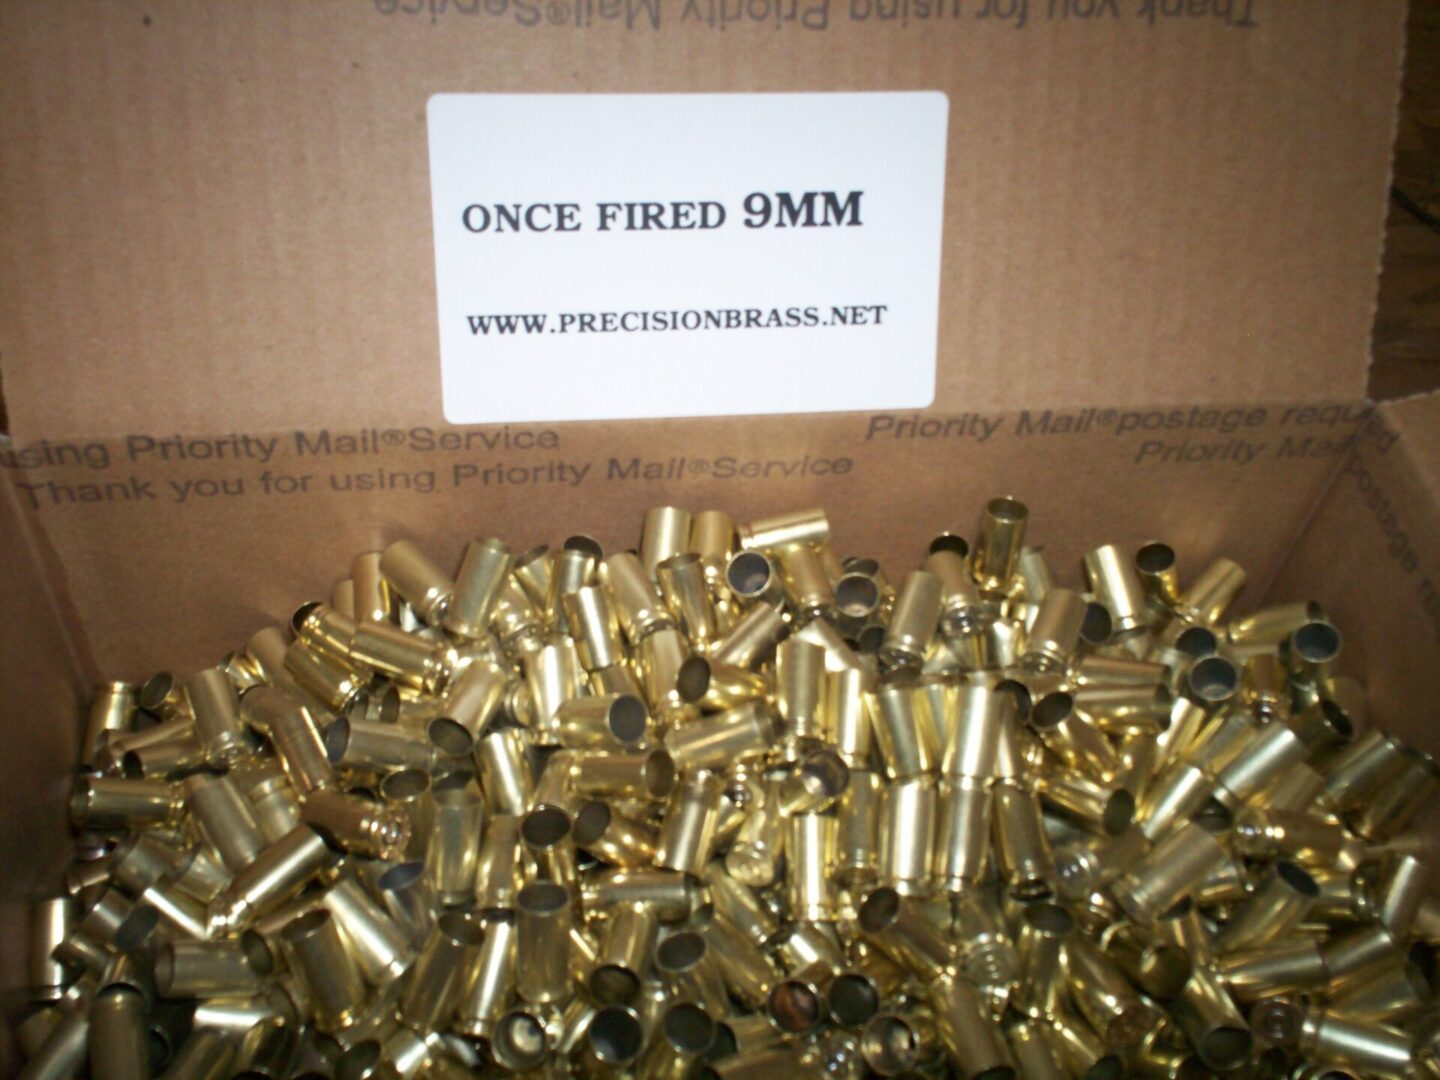 9mm Brass For Sale, 9mm Once Fired Brass